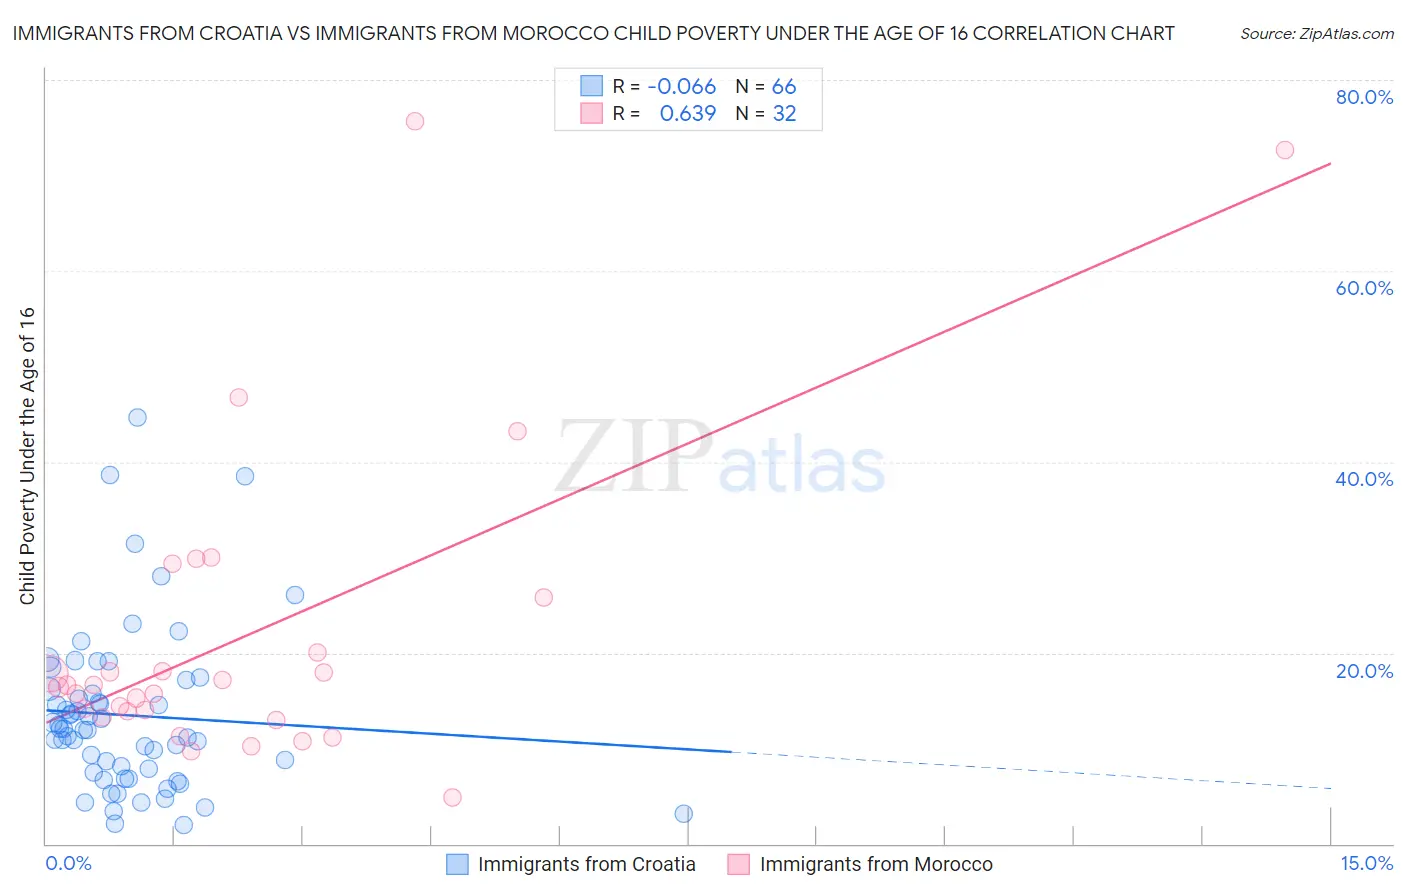 Immigrants from Croatia vs Immigrants from Morocco Child Poverty Under the Age of 16